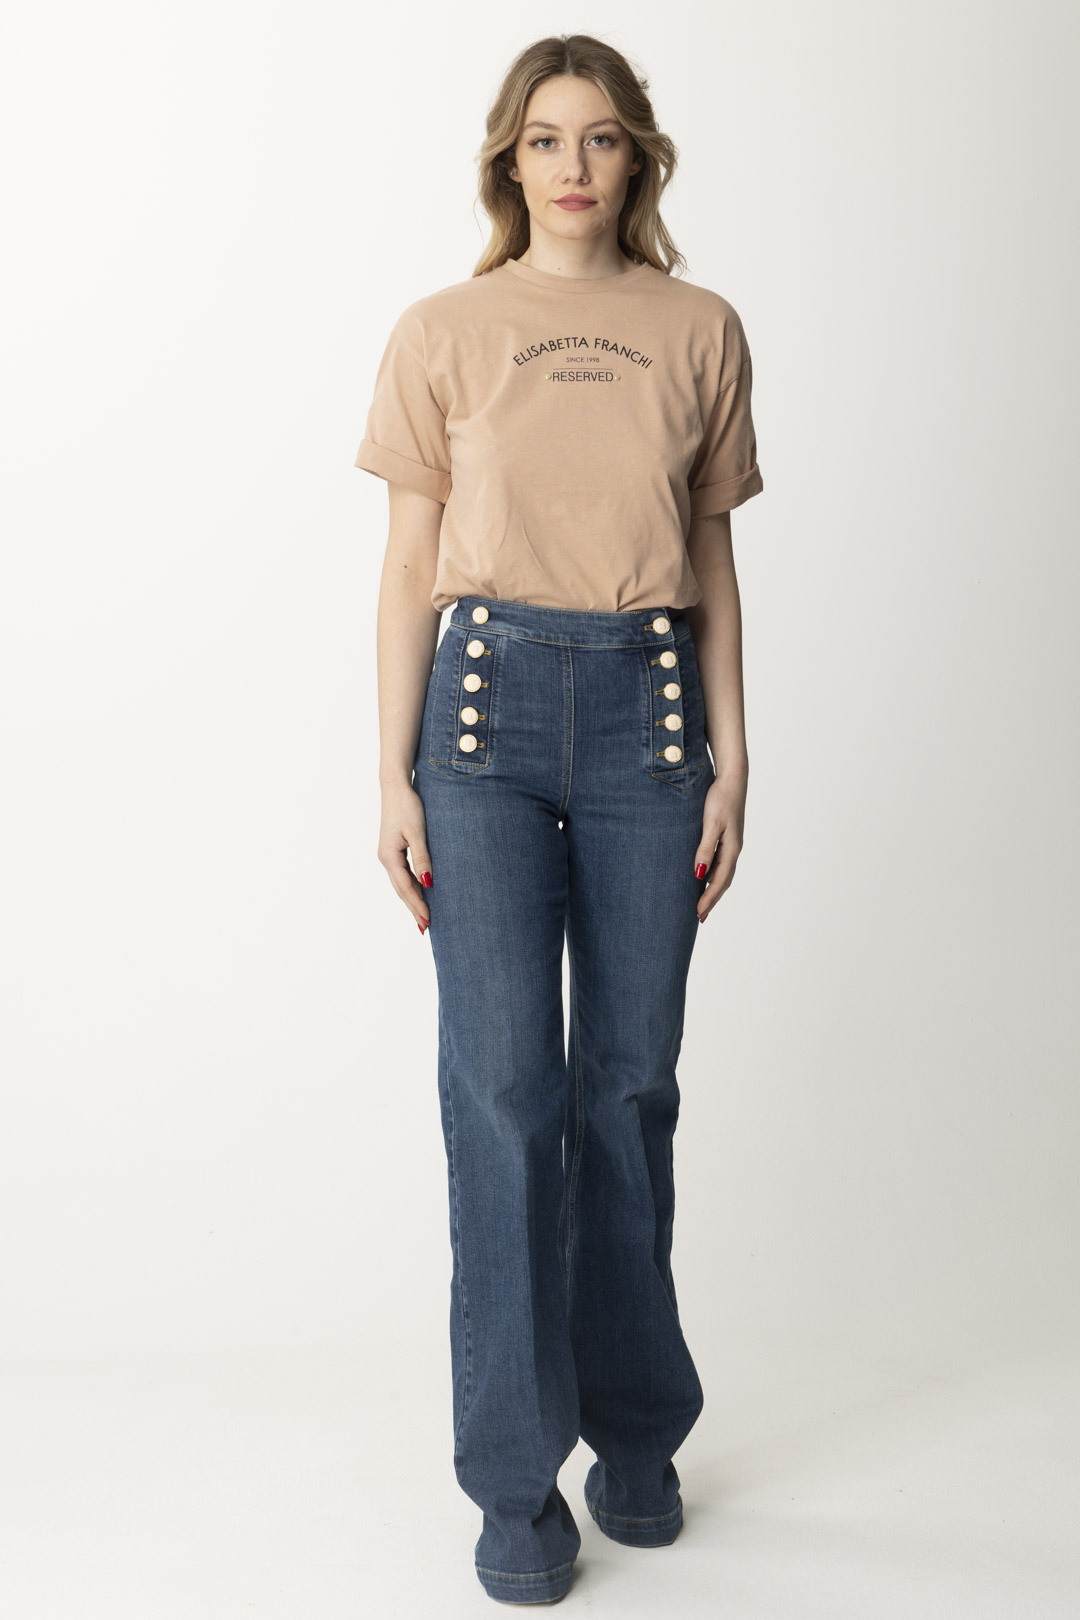 Preview: Elisabetta Franchi T-shirt with Reserved Print Nudo